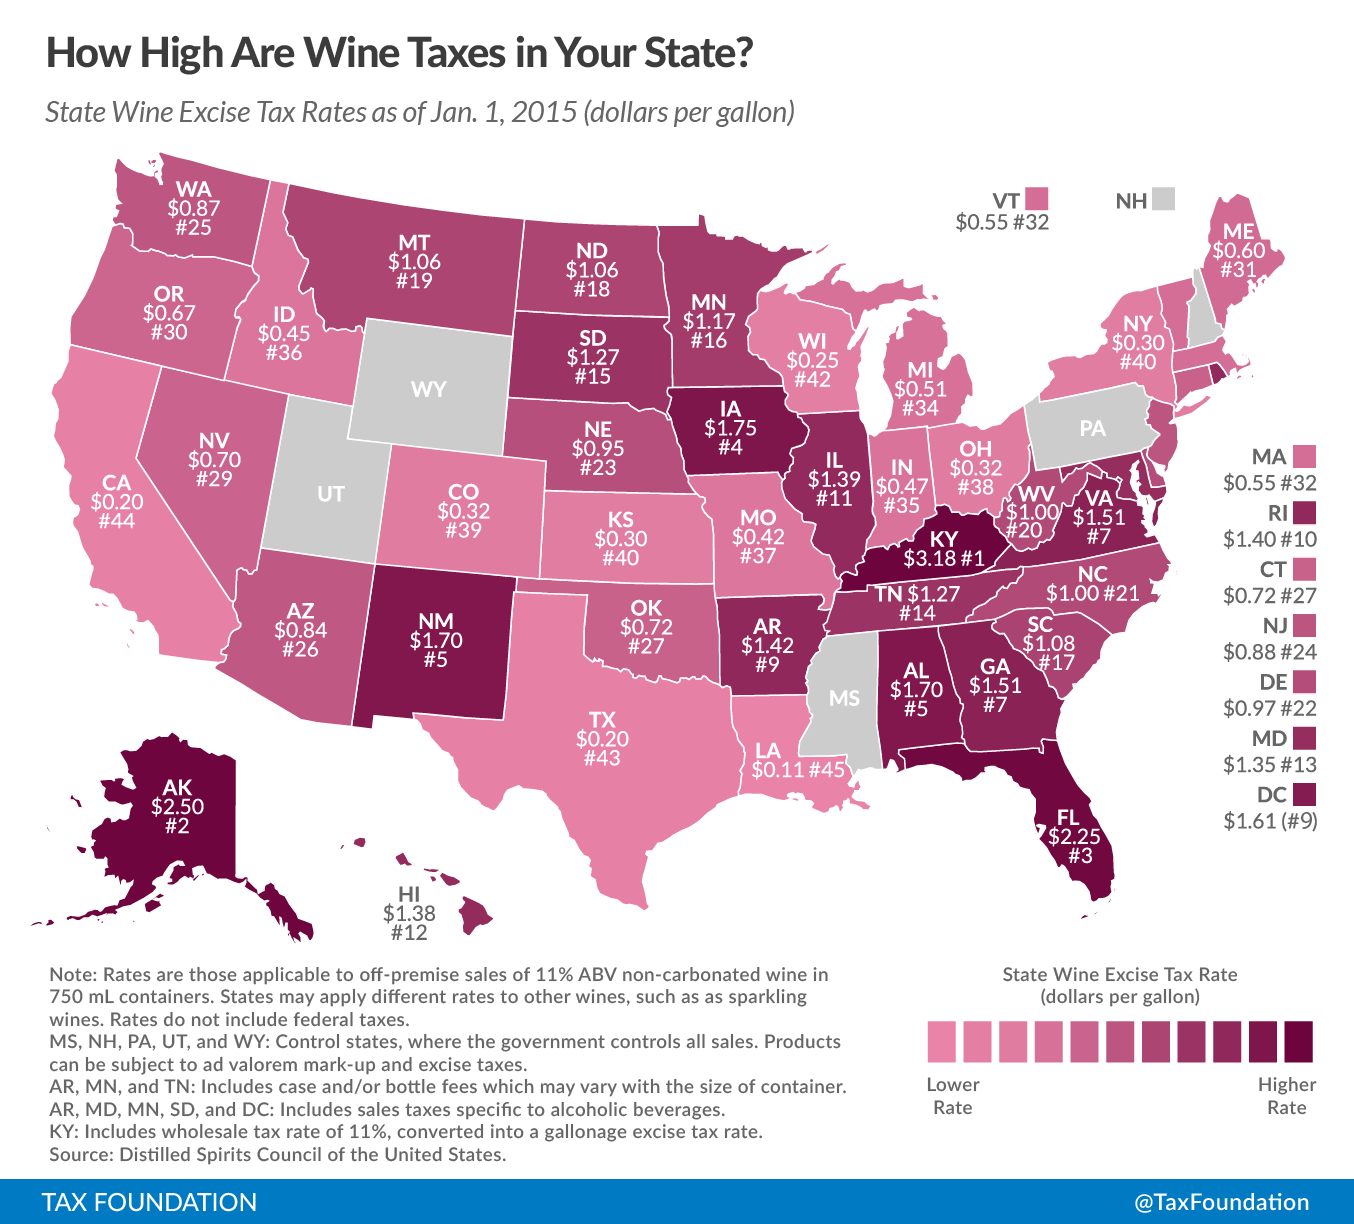 8-Wine Excise Tax Rates 2015-Franklin_liquors